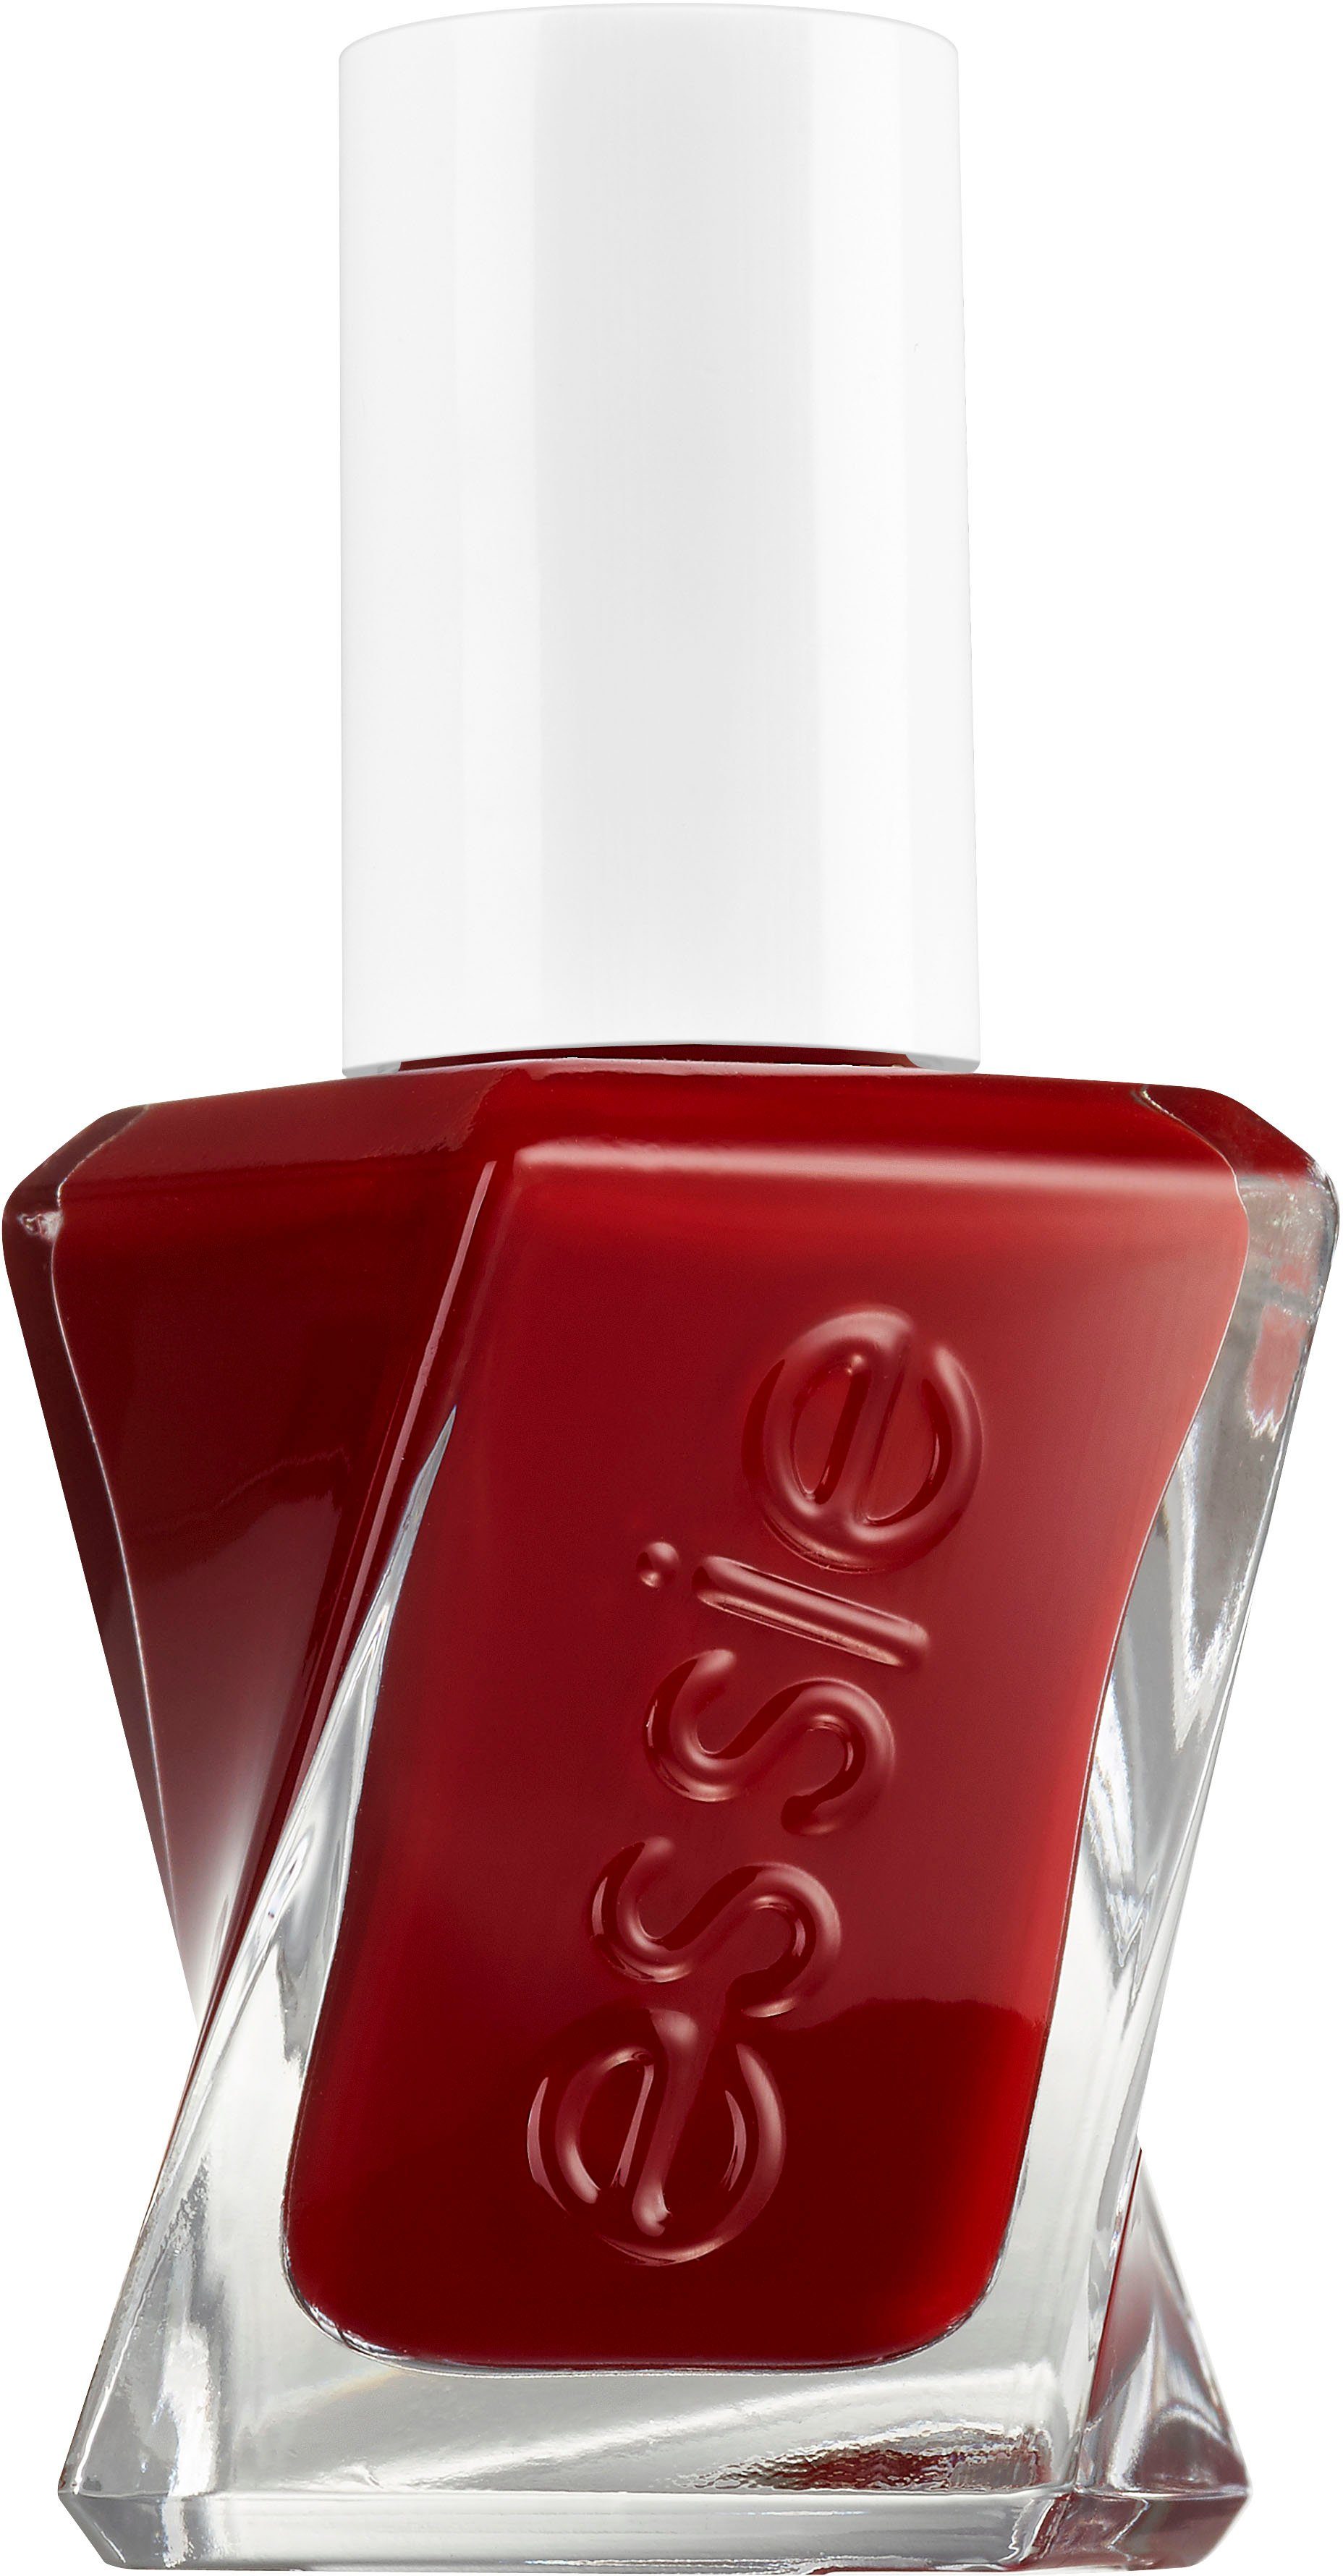 essie Gel-Nagellack Gel 345 Couture bubbles only Nr. Rot